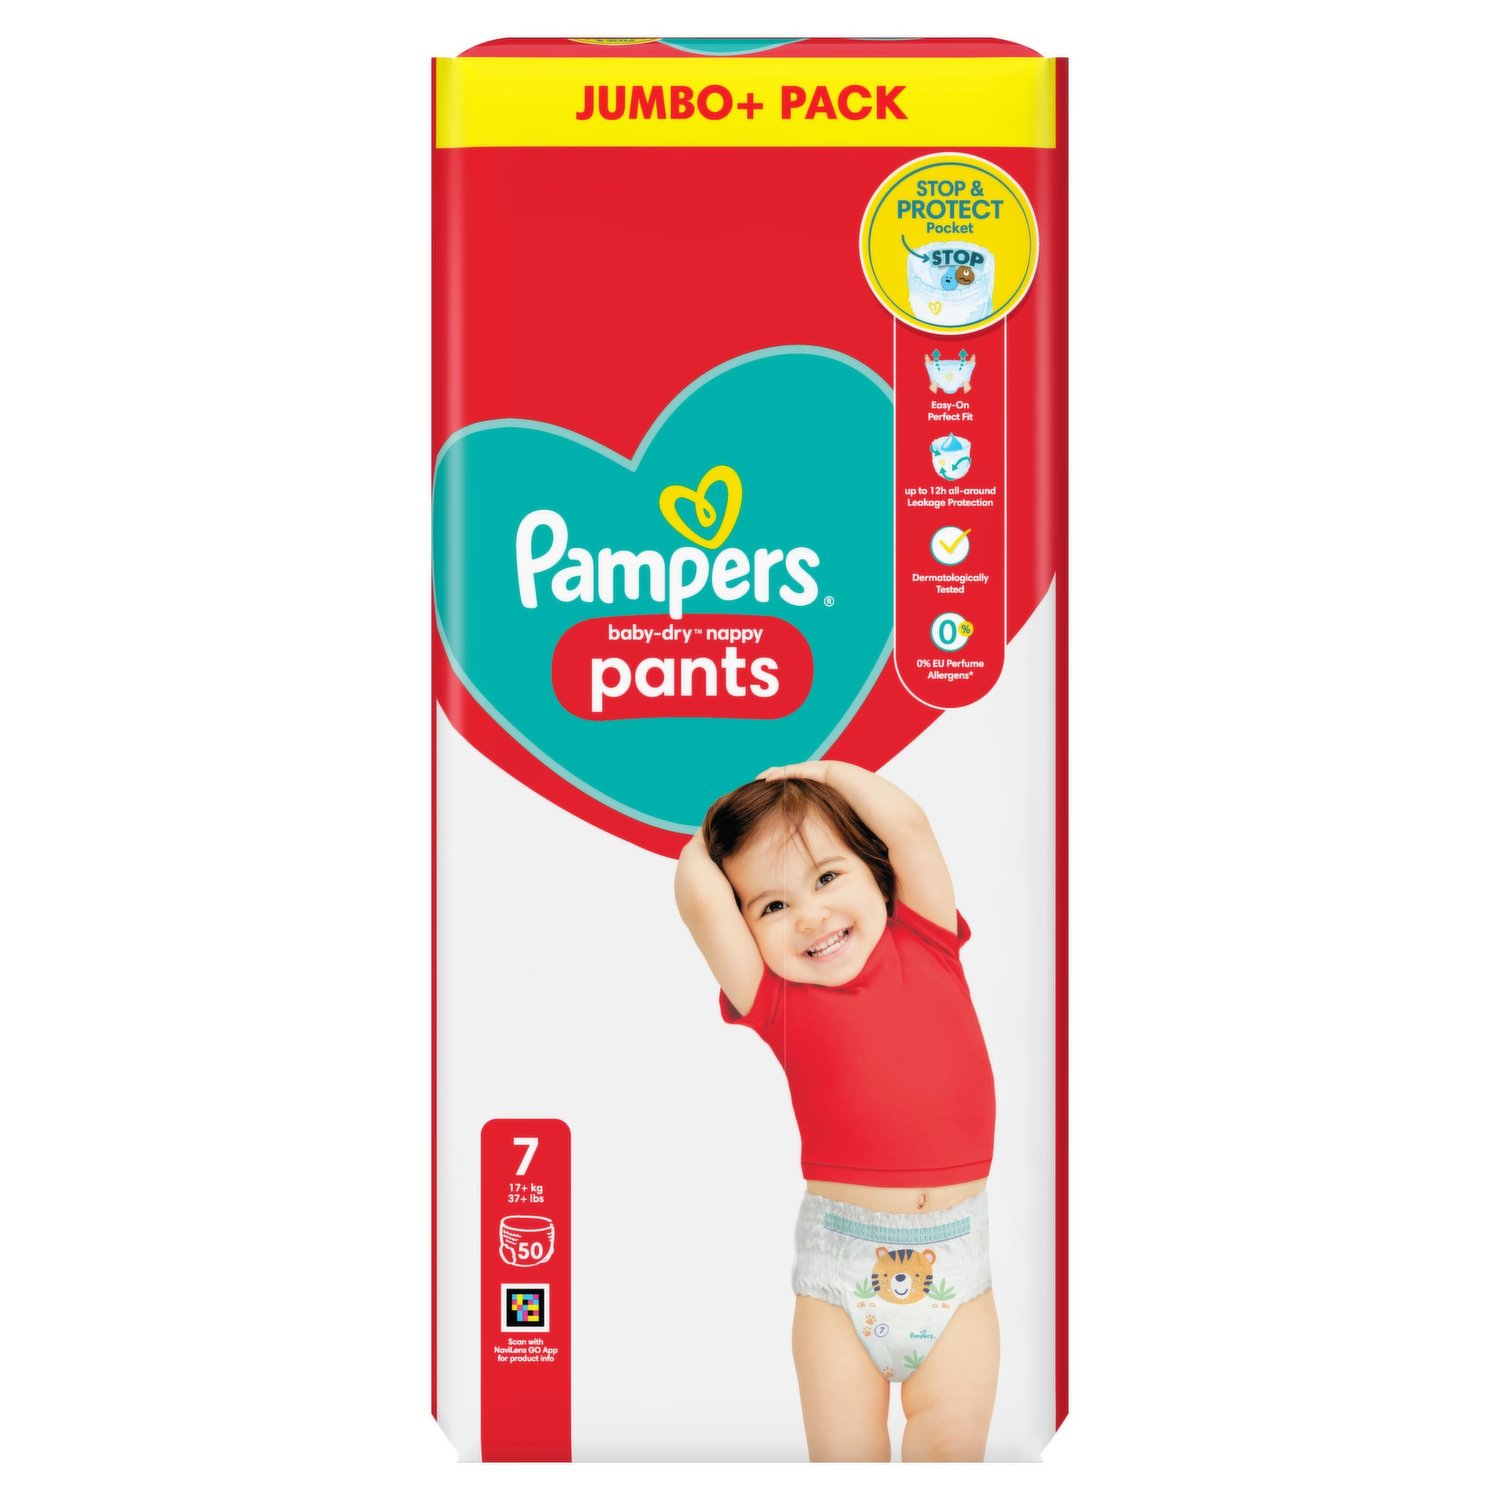 Pampers Baby Dry Nappy Pants Size 6 Jumbo+ 54 Pack - Tesco Groceries